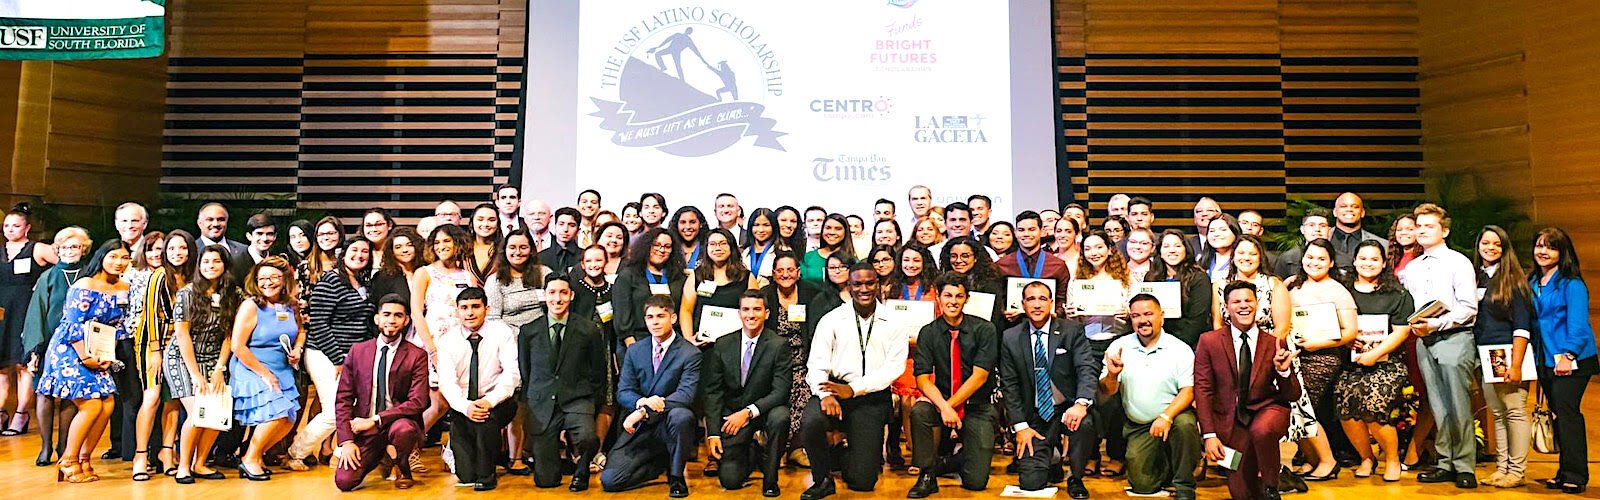 There are 147 students in the USF Latino Scholarship Program. 